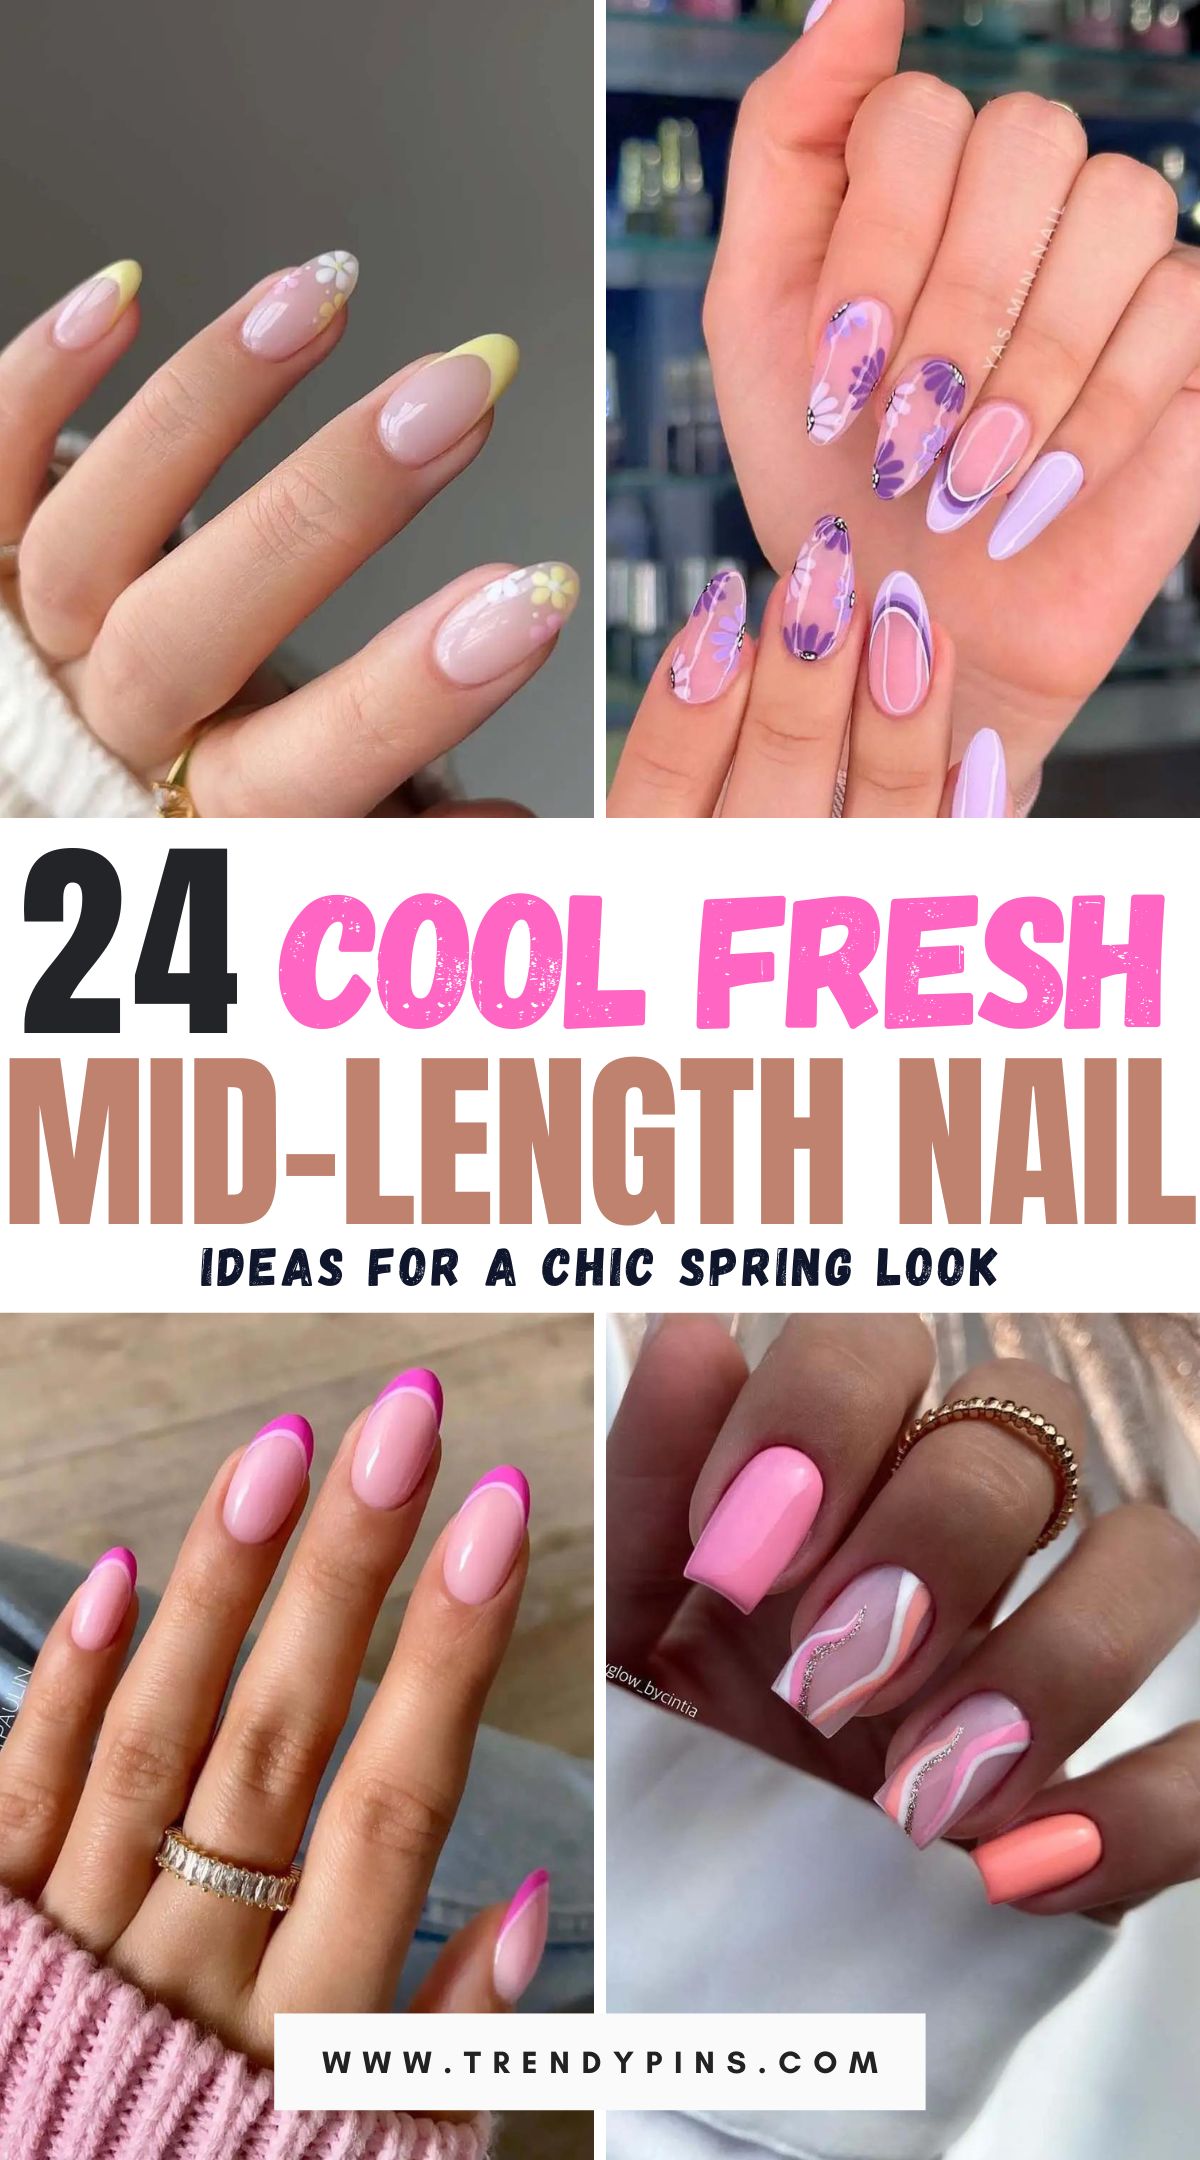 Elevate your mid-length nails with these 24 stunning spring nail designs. Explore creative and vibrant nail art ideas that add a touch of seasonal beauty and style to your look.